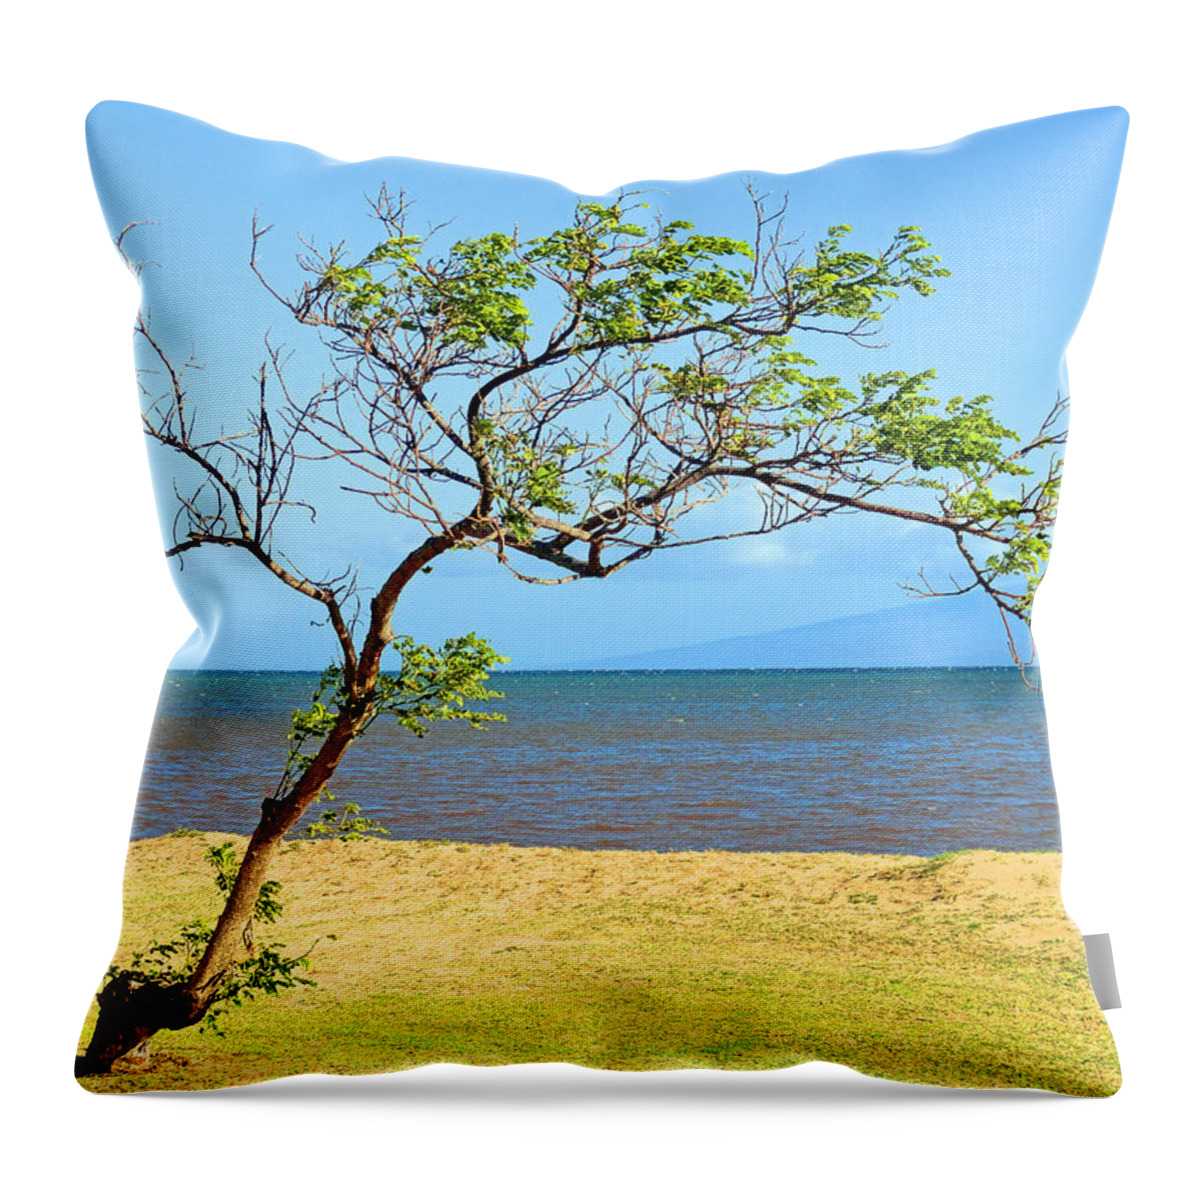 Molokai Throw Pillow featuring the photograph Lanai Leaning by Robert Meyers-Lussier